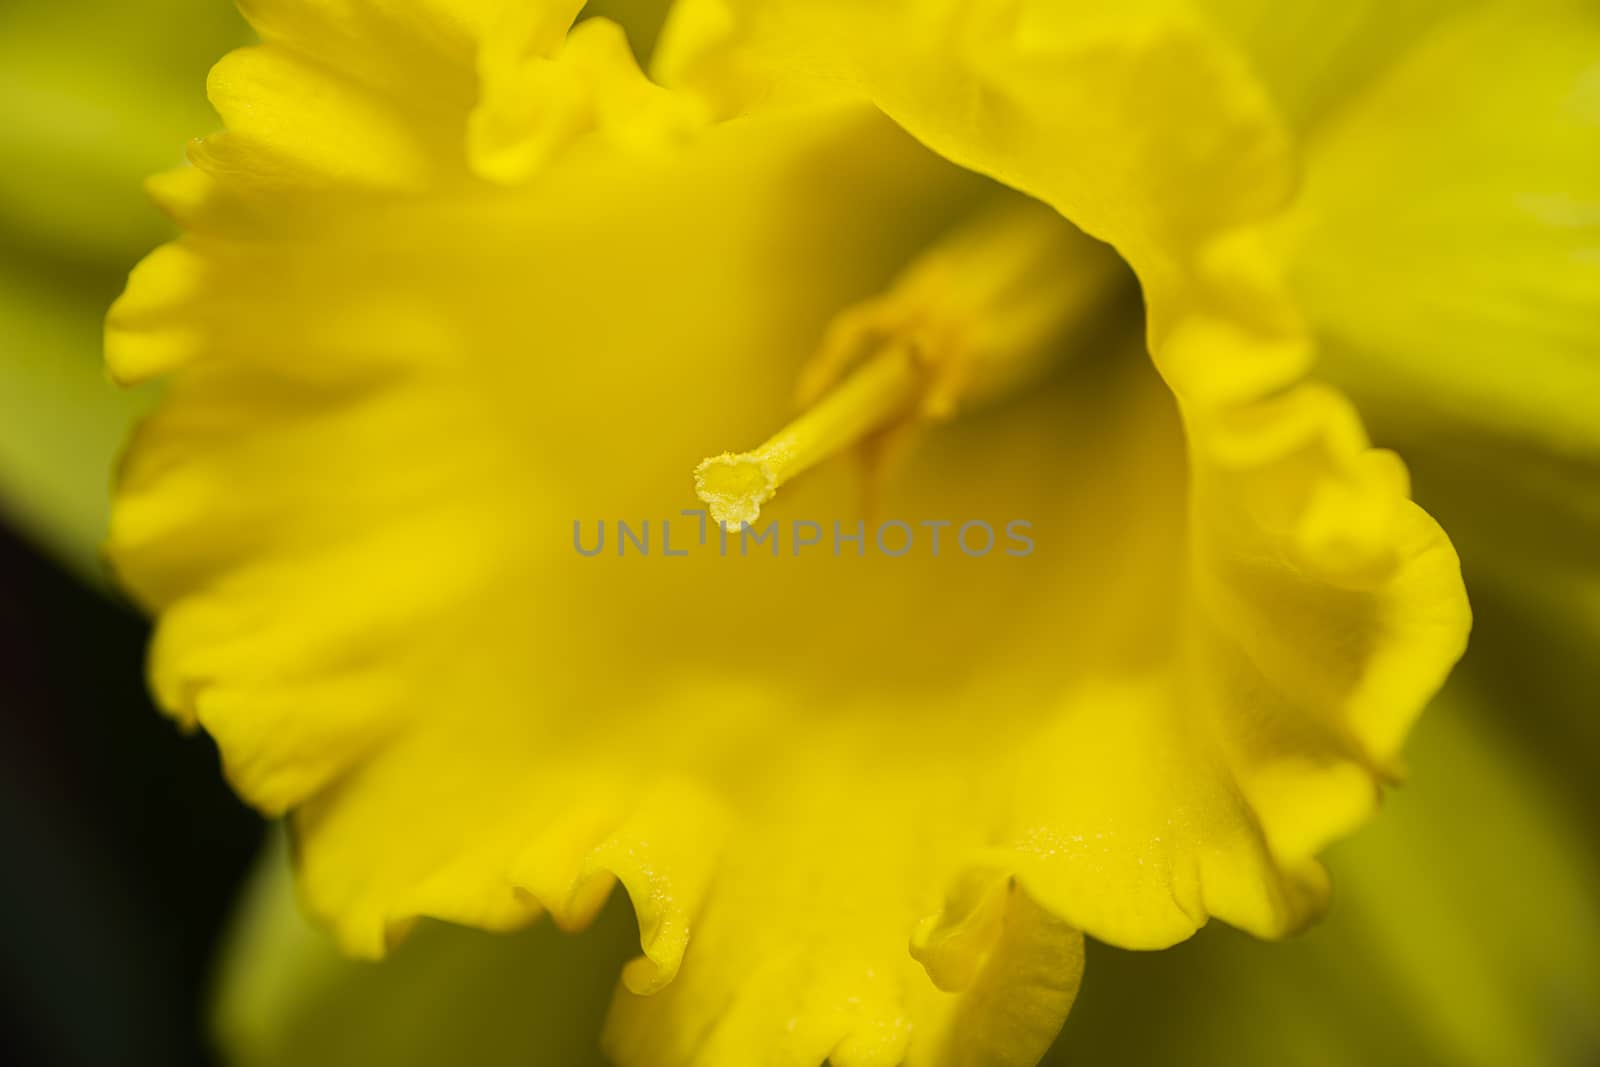 Macro view of the inside of a daffodill